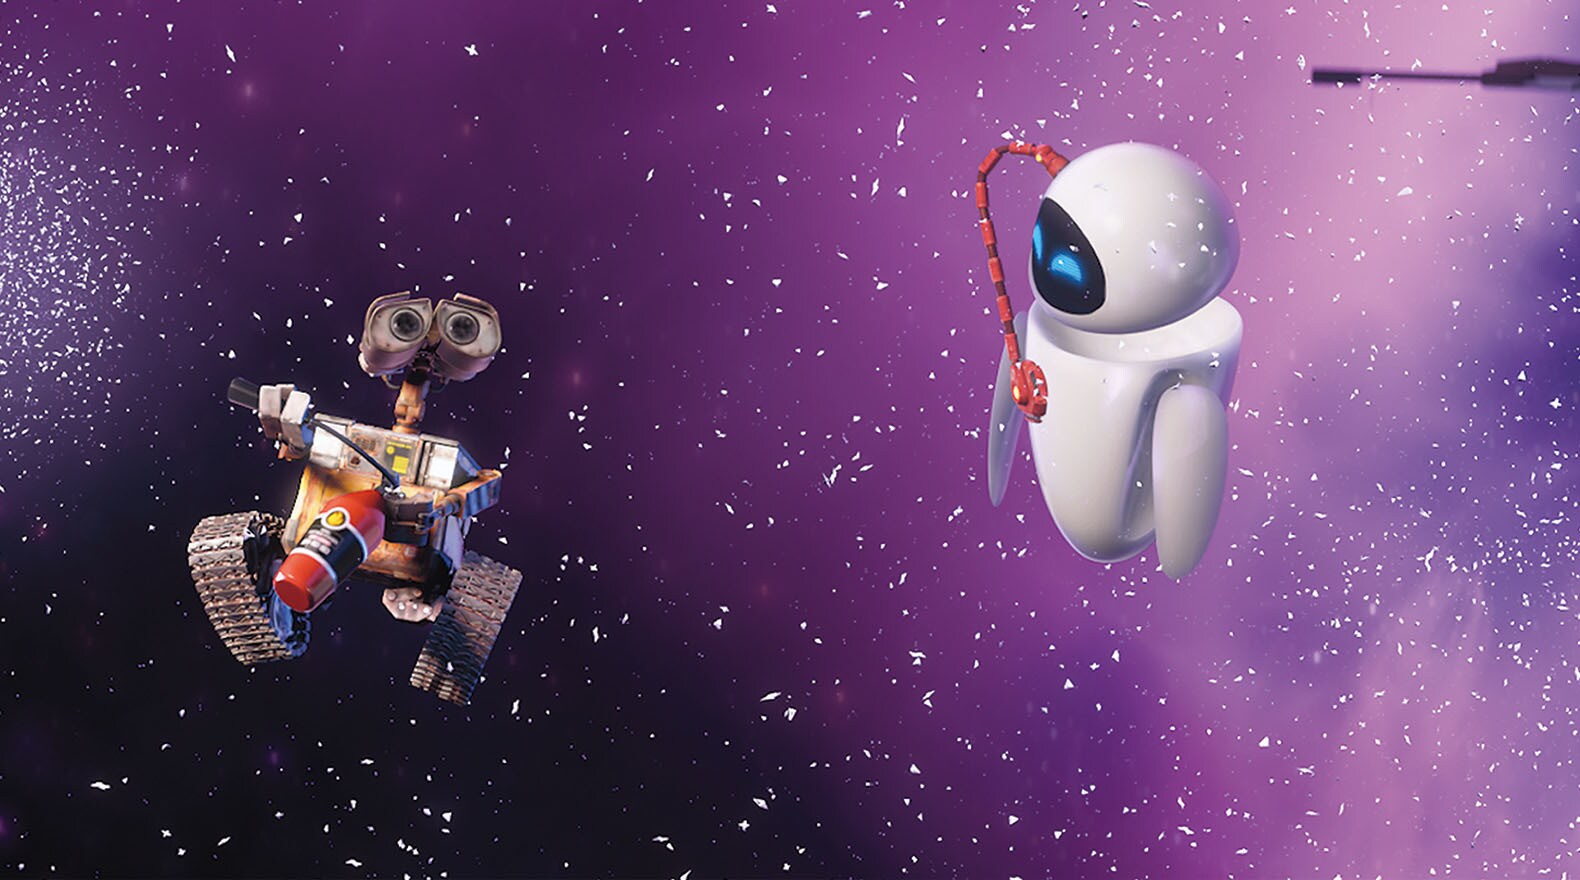 WALL•E figures out an ingenious way to navigate space, from the movie "Wall-E"